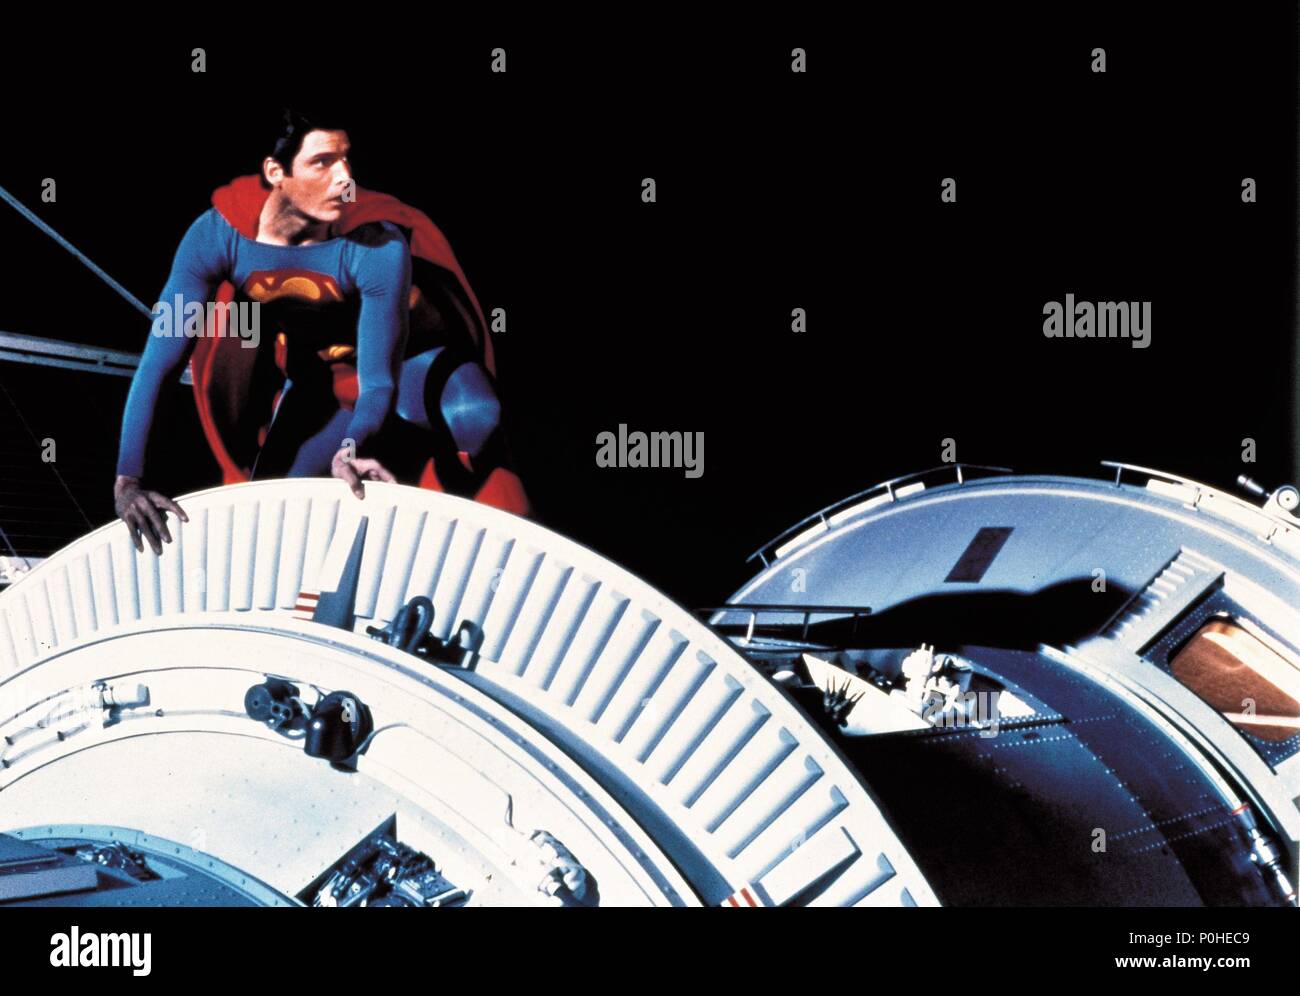 Original Film Title: SUPERMAN IV: THE QUEST FOR PEACE. English Title:  SUPERMAN IV: THE QUEST FOR PEACE. Film Director: SIDNEY J. FURIE. Year:  1987. Stars: CHRISTOPHER REEVE. Credit: CANNON FILMS / Album